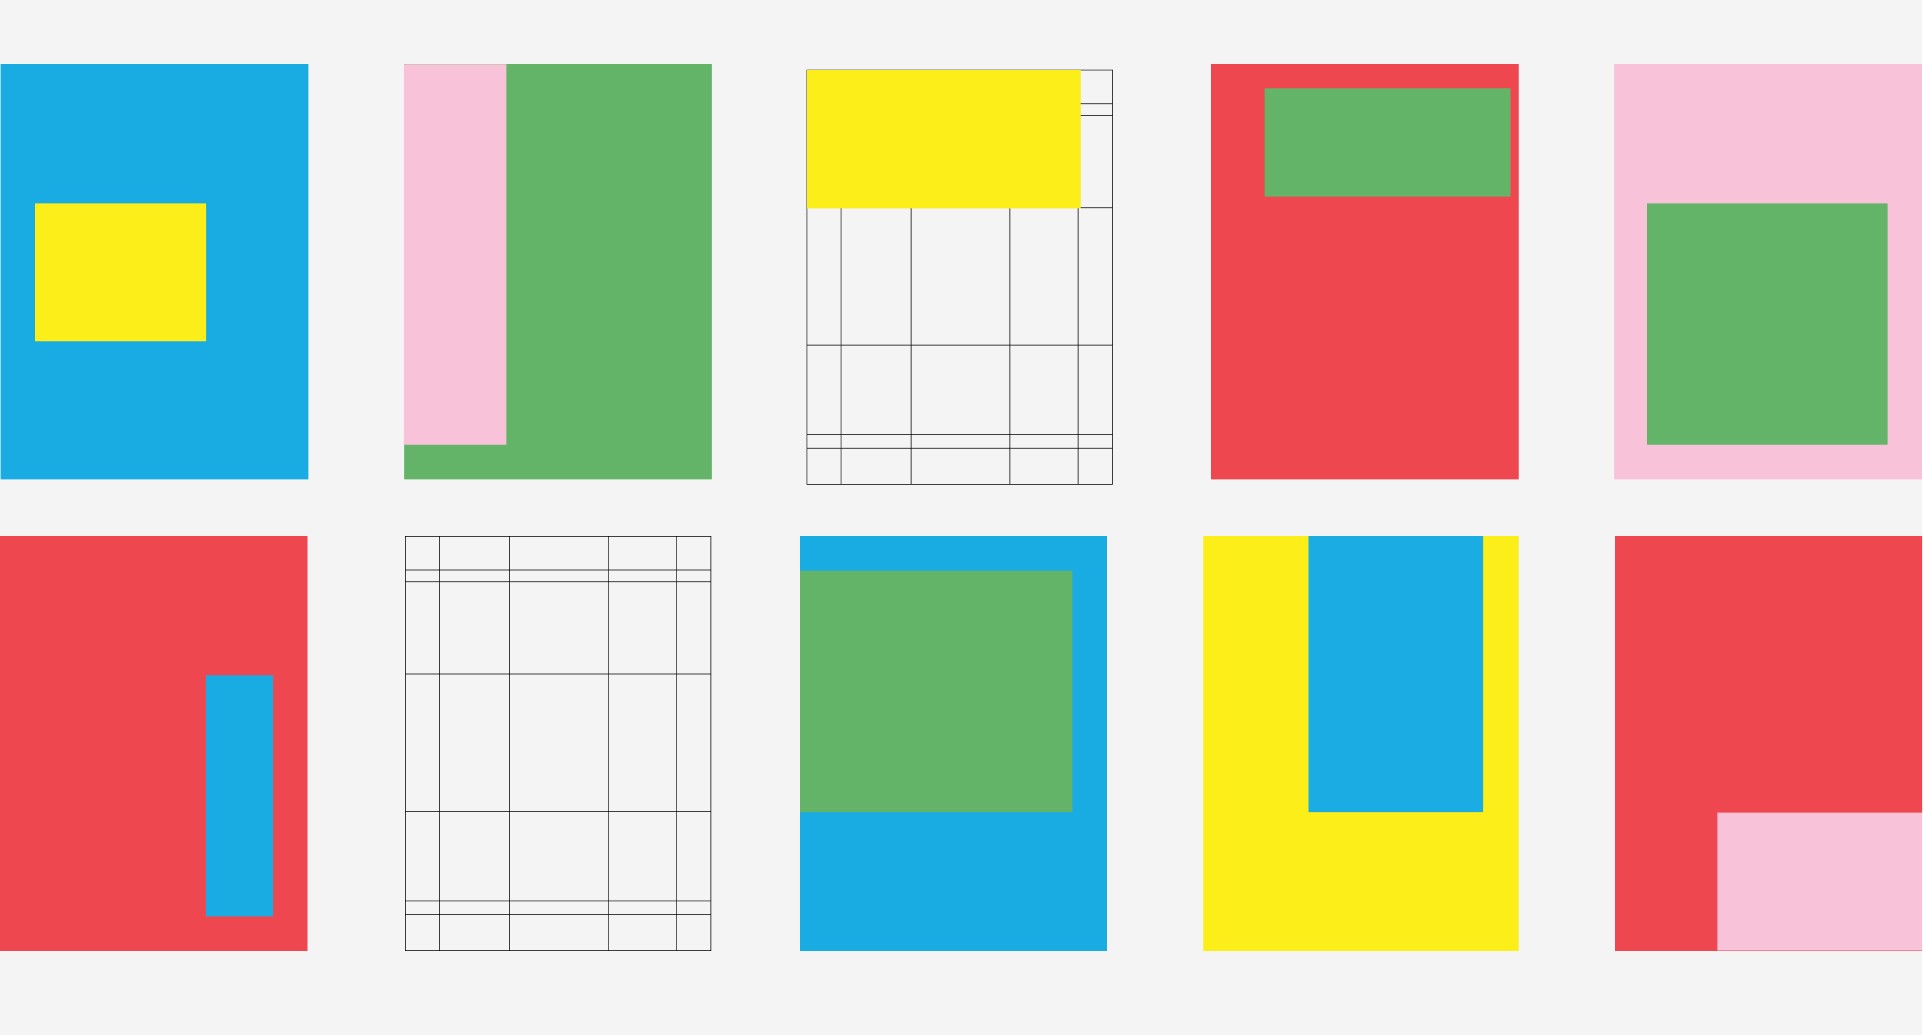 Sketches showing the system in action using color blocks.